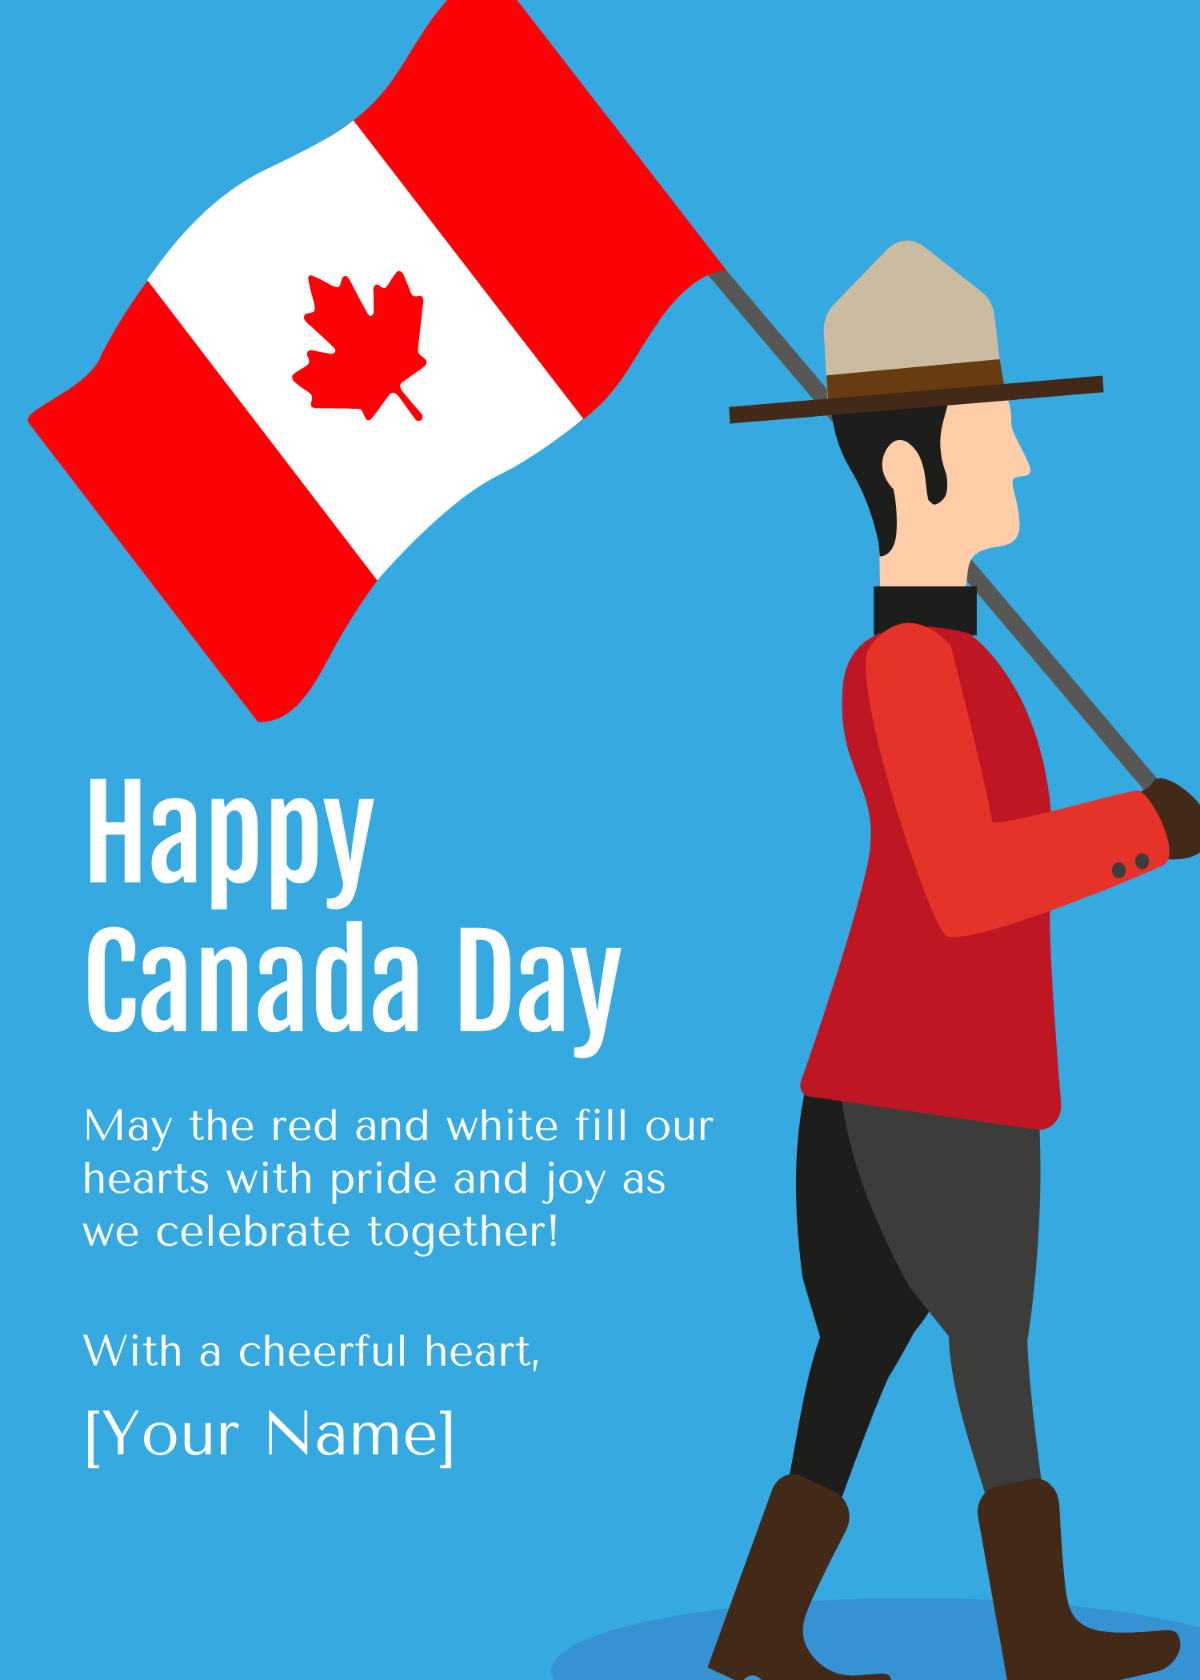 Canada Day Wishes For Family